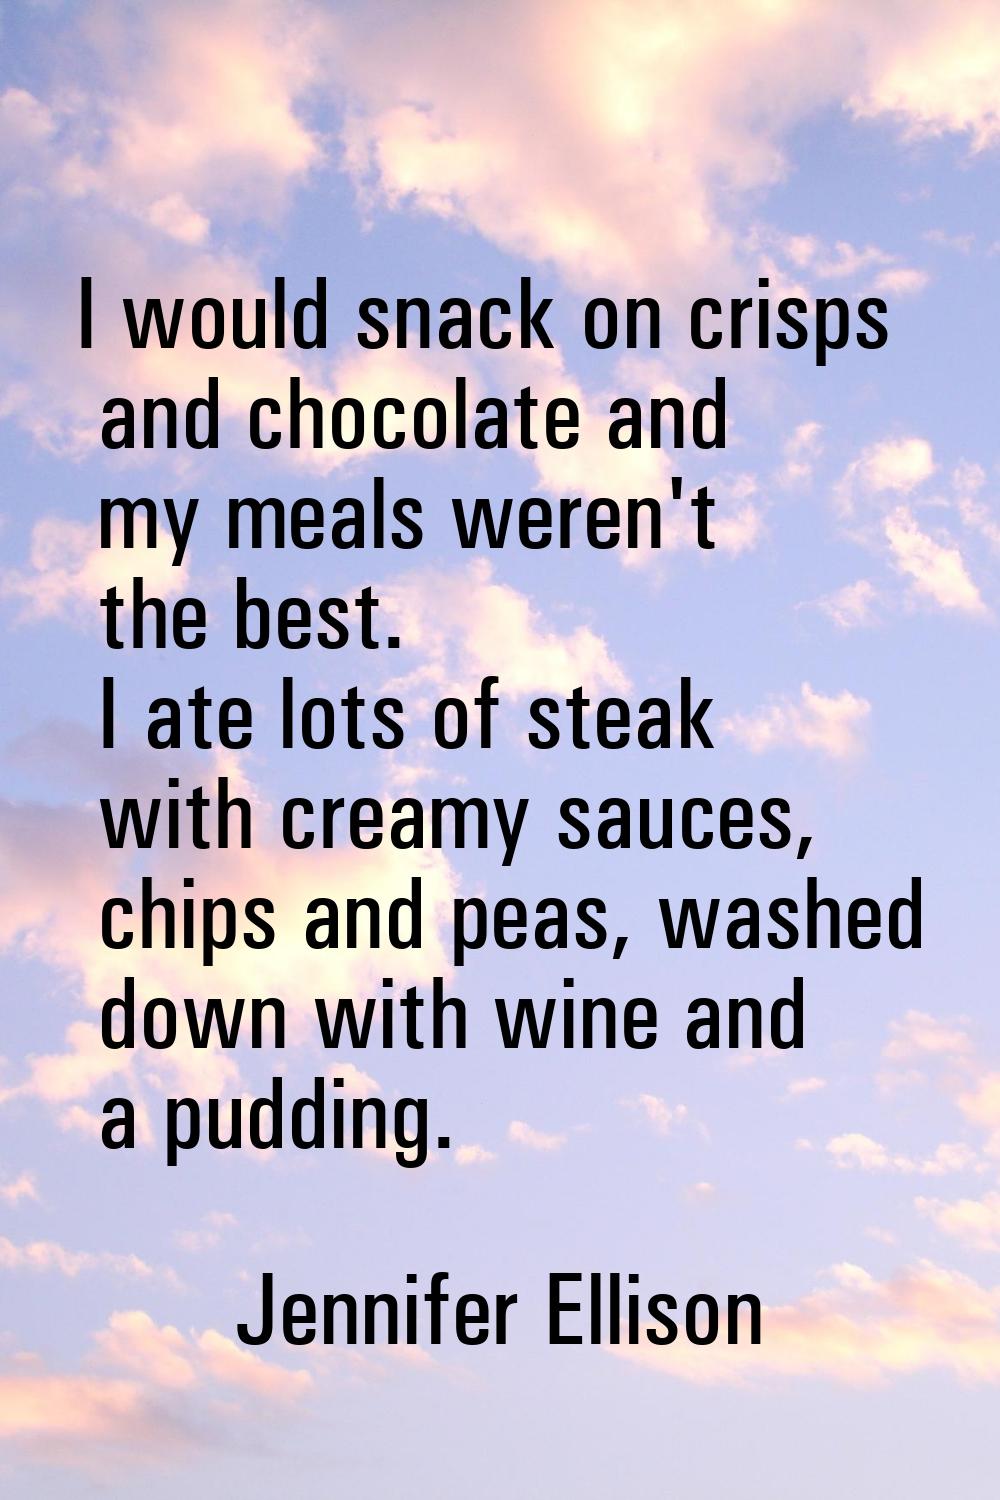 I would snack on crisps and chocolate and my meals weren't the best. I ate lots of steak with cream